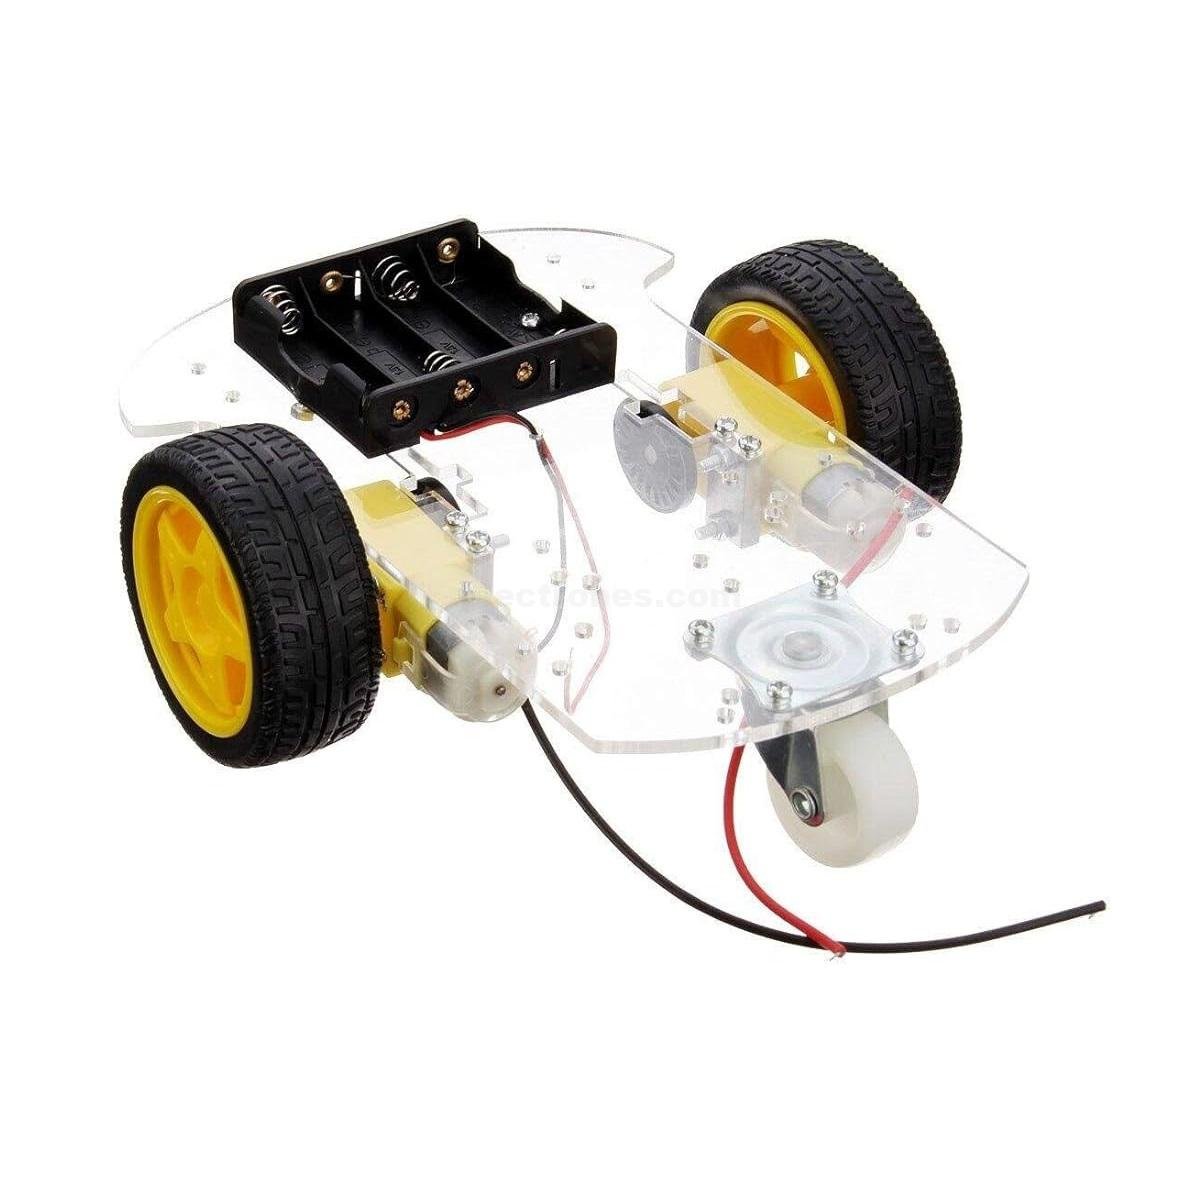 2WD Smart Robot Car Chassis Kit w/ DC Motor Set in Pakistan